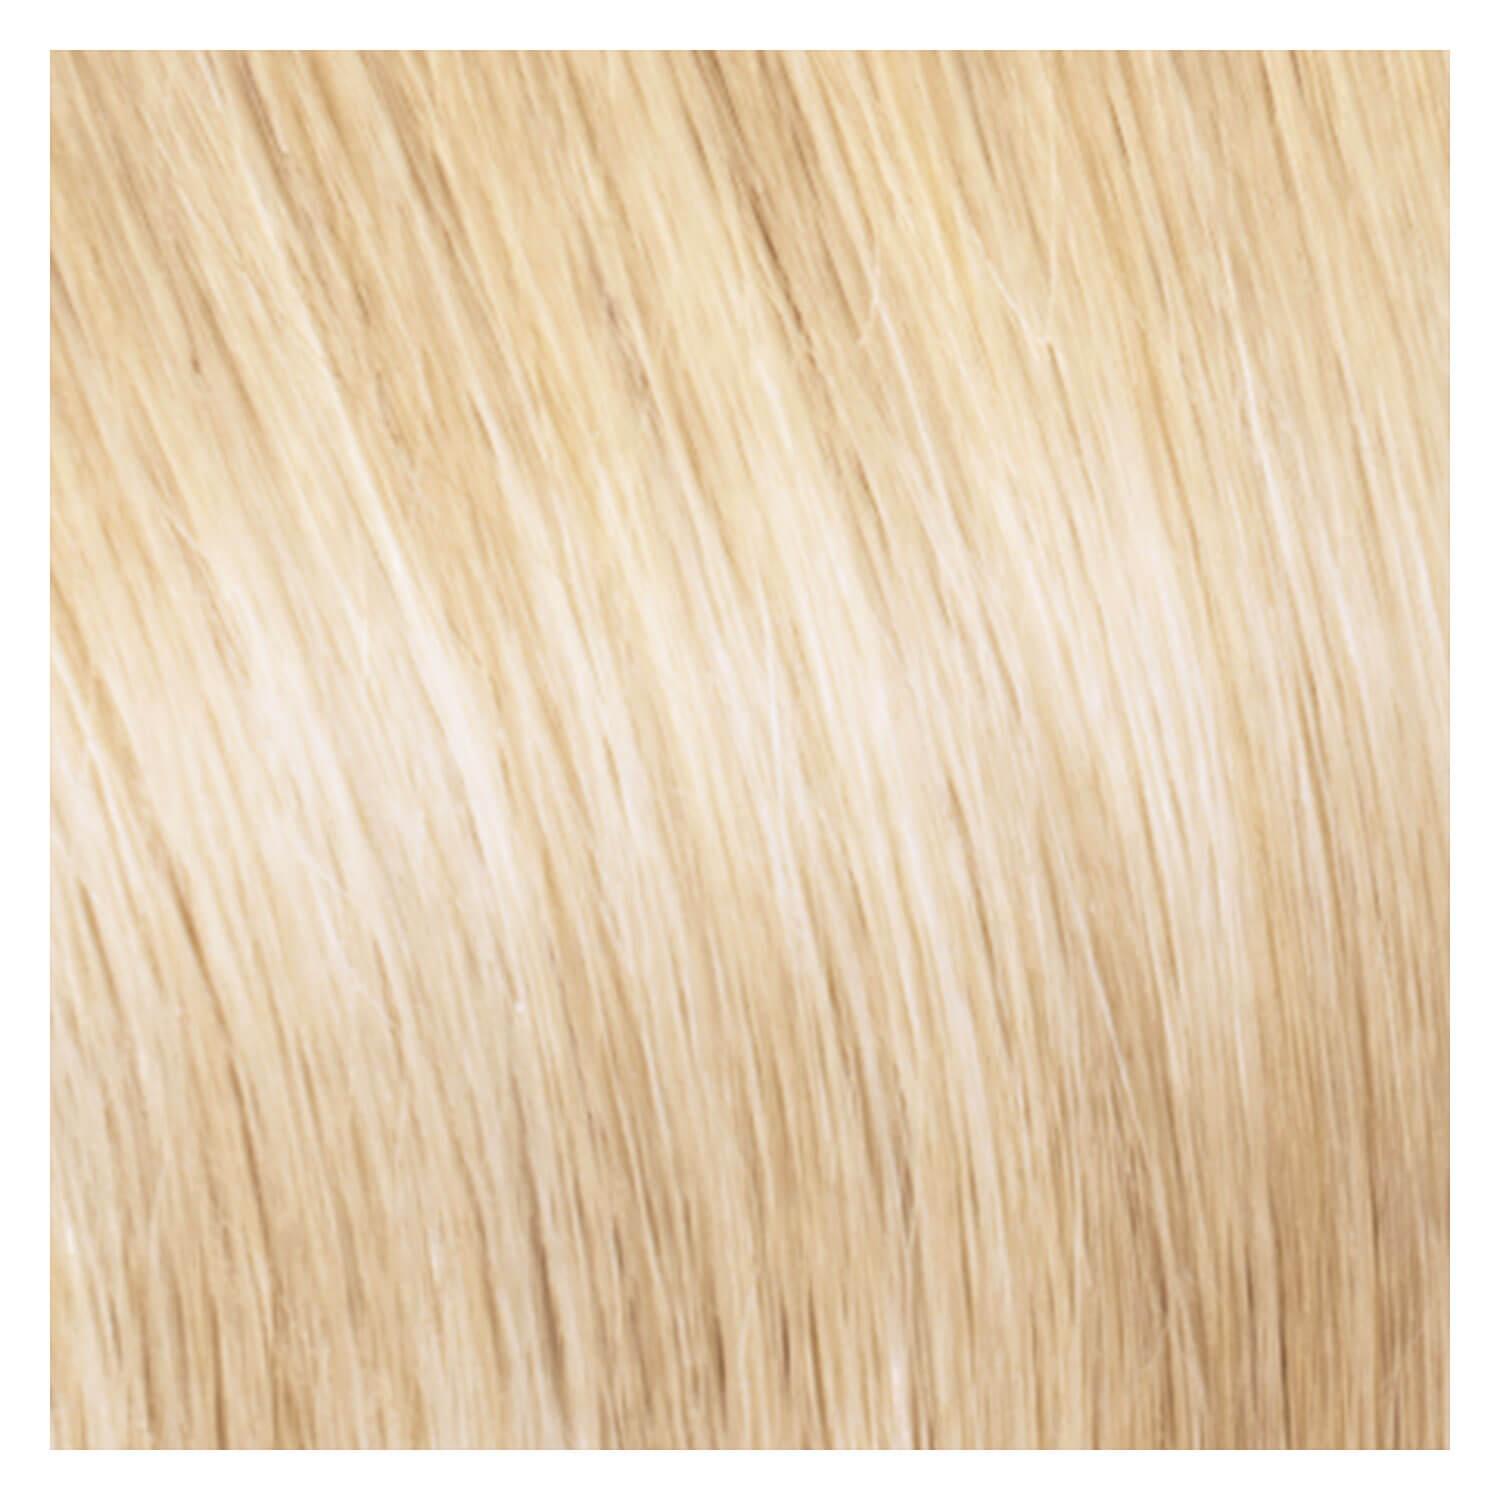 SHE Weft In-System Hair Extensions - 23 Ultra Weissblond 50/60cm